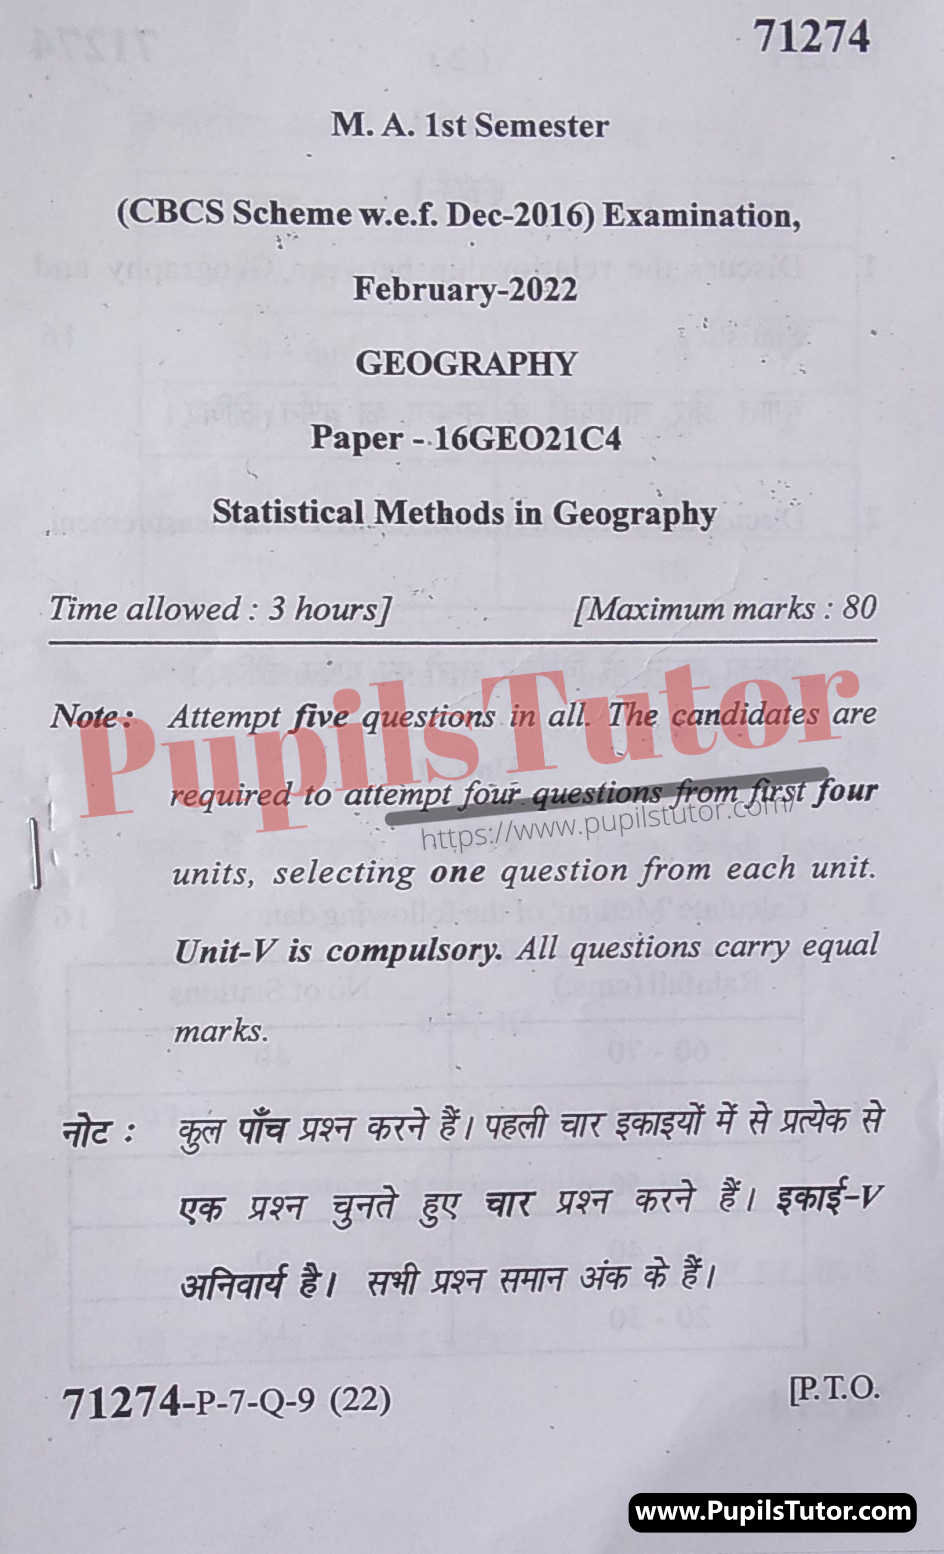 MDU (Maharshi Dayanand University, Rohtak Haryana) MA Geography CBCS Scheme First Semester Previous Year Statistical Methods In Geography Question Paper For February, 2022 Exam (Question Paper Page 1) - pupilstutor.com